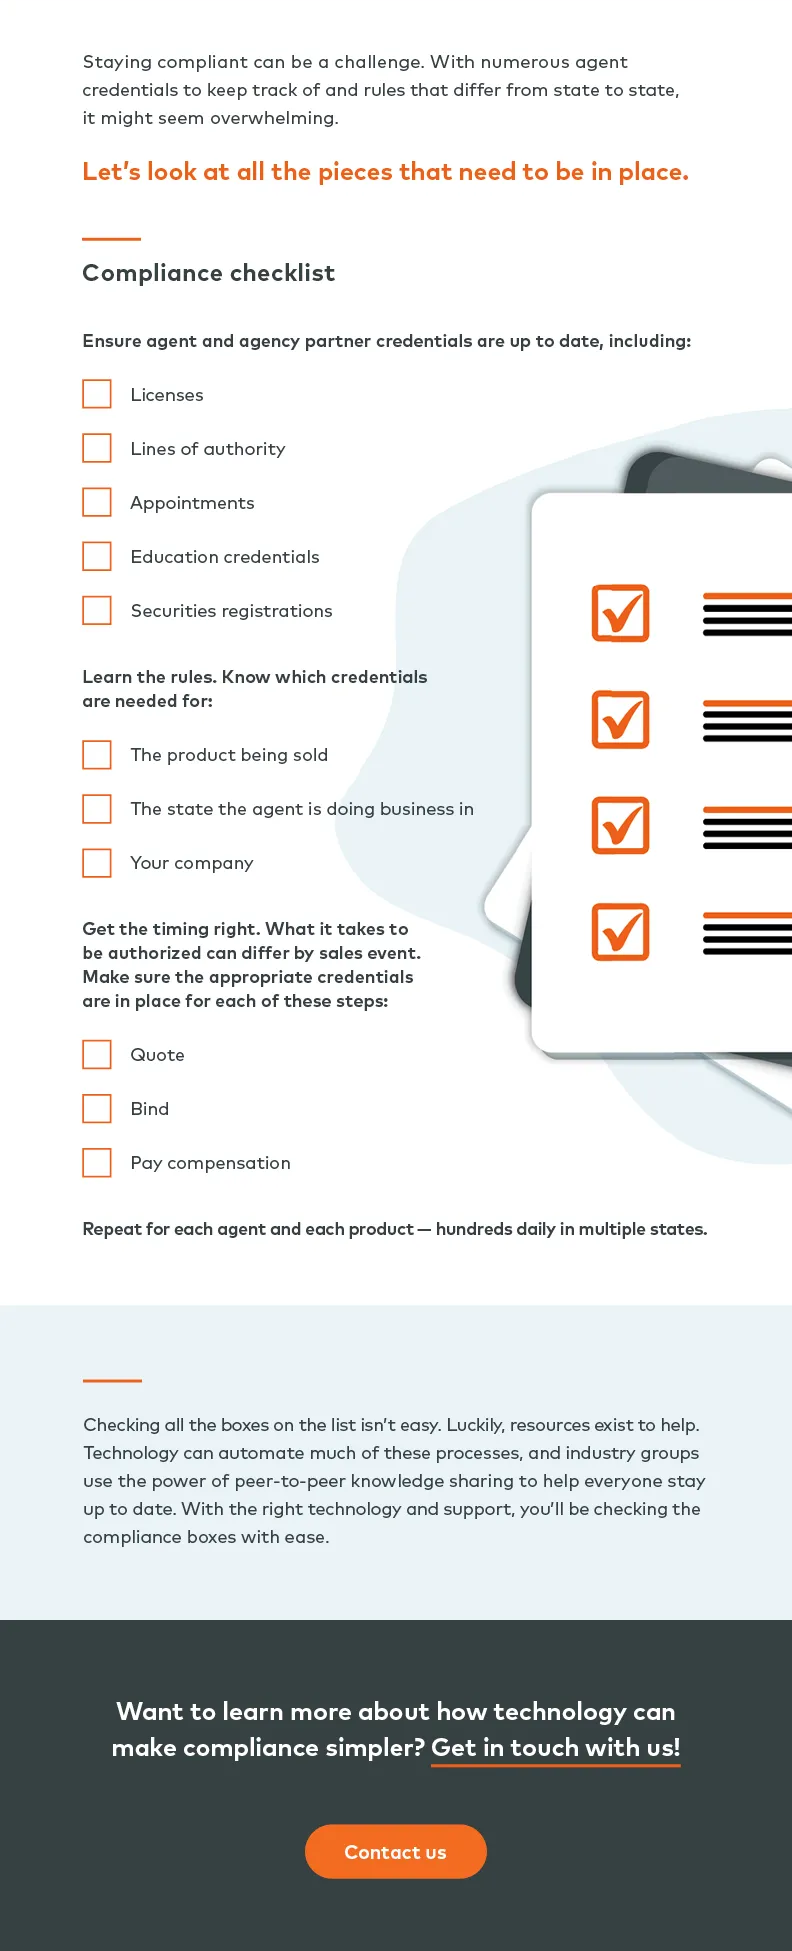 Carrier compliance checklist infographic